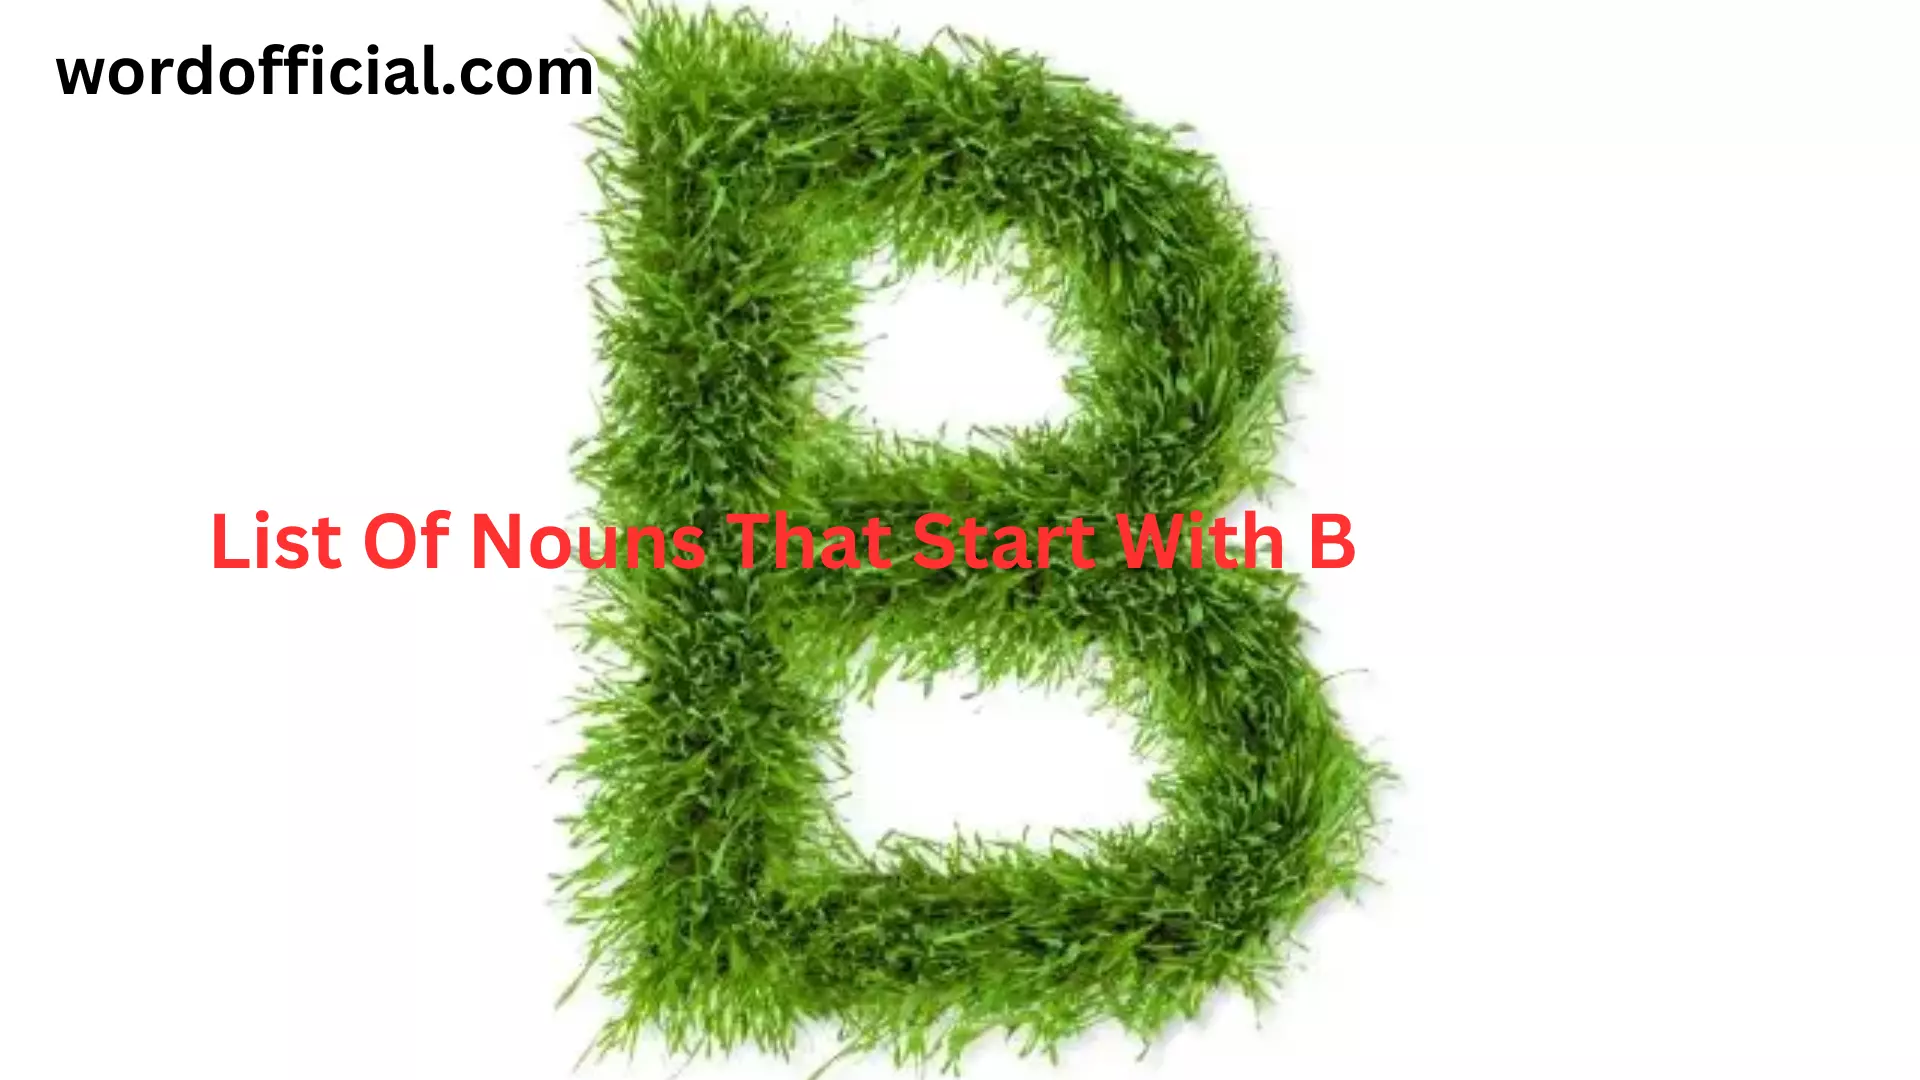 List Of Nouns That Start With B